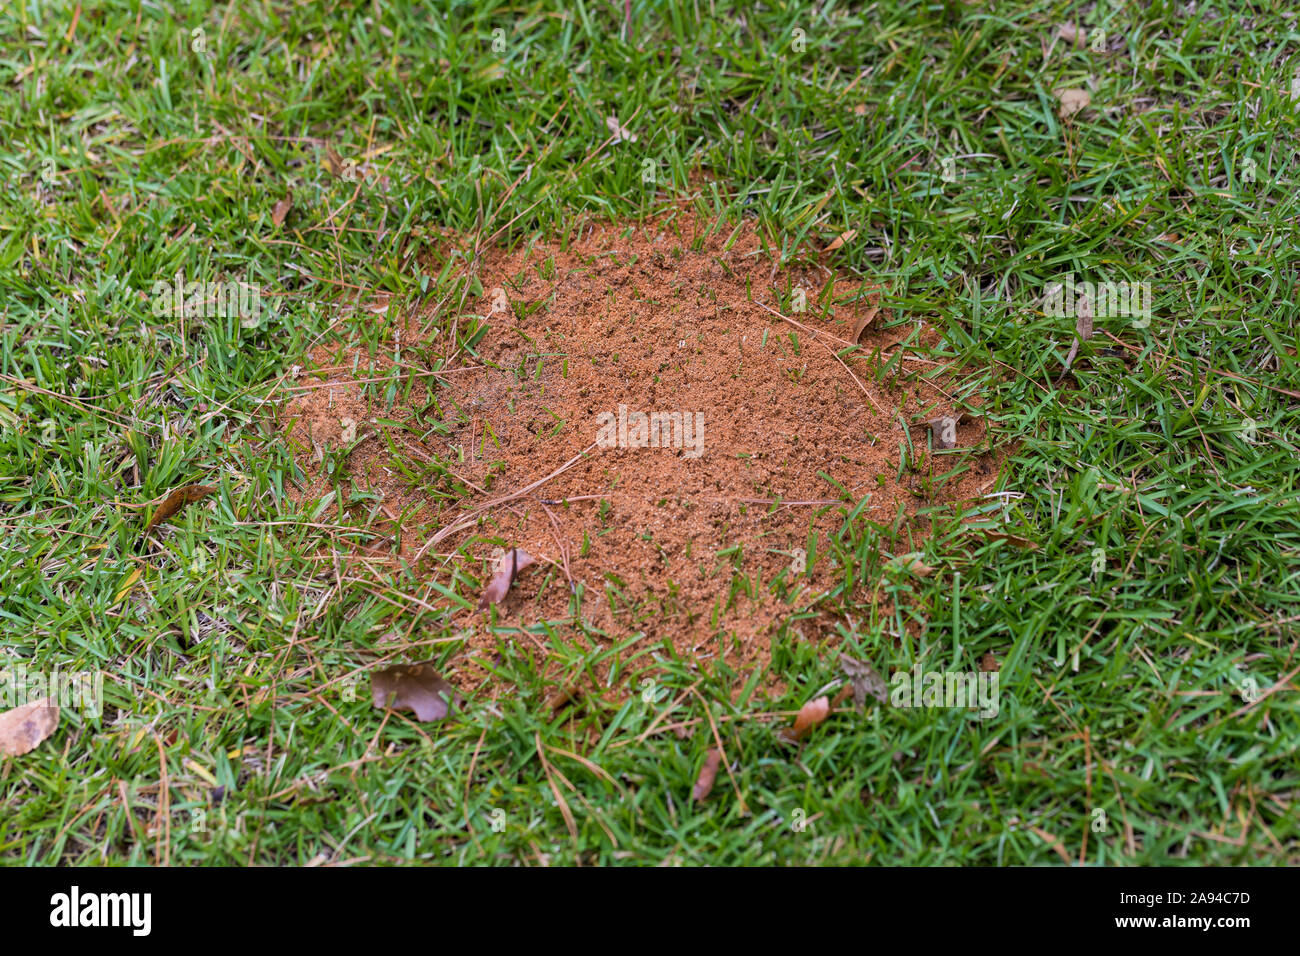 large fire ant mound in green grass with copy space Stock Photo